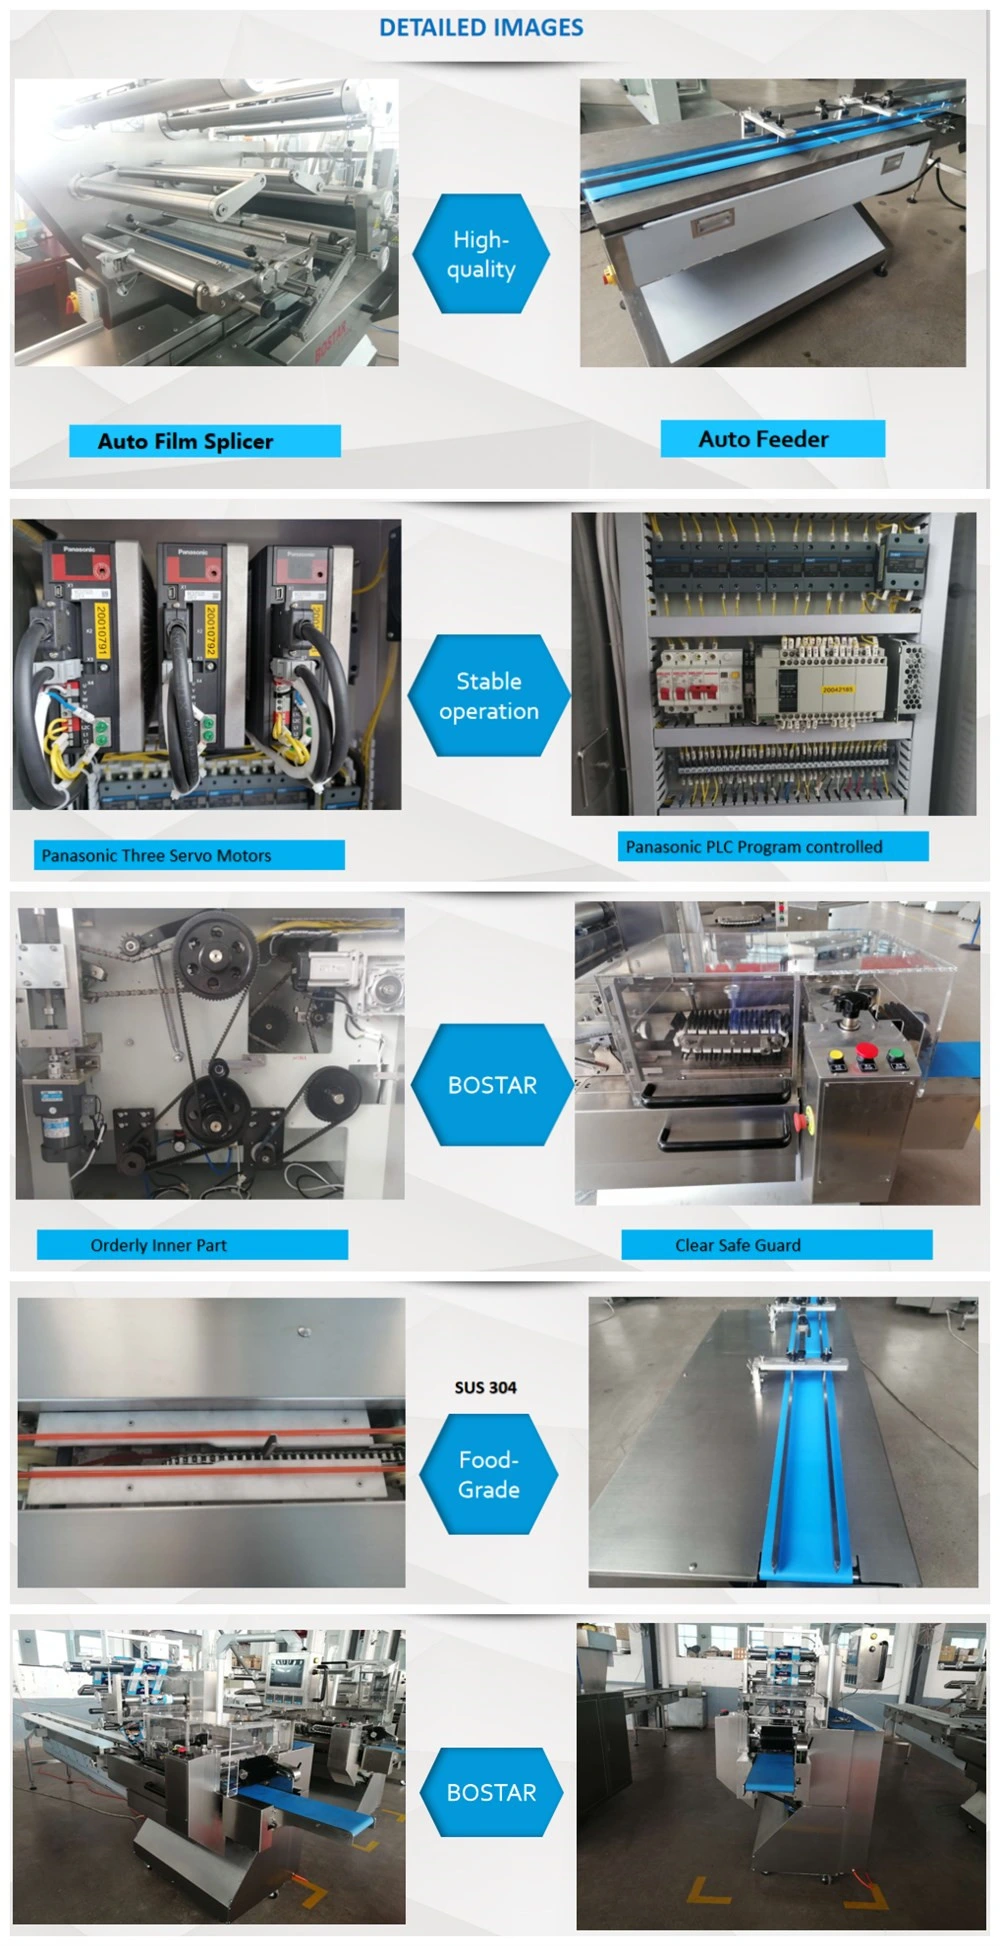 Automatic Single Block Fried Instant Noodles/Noodle Flow Packing Packaging Machine with Servo Motors/PLC Control